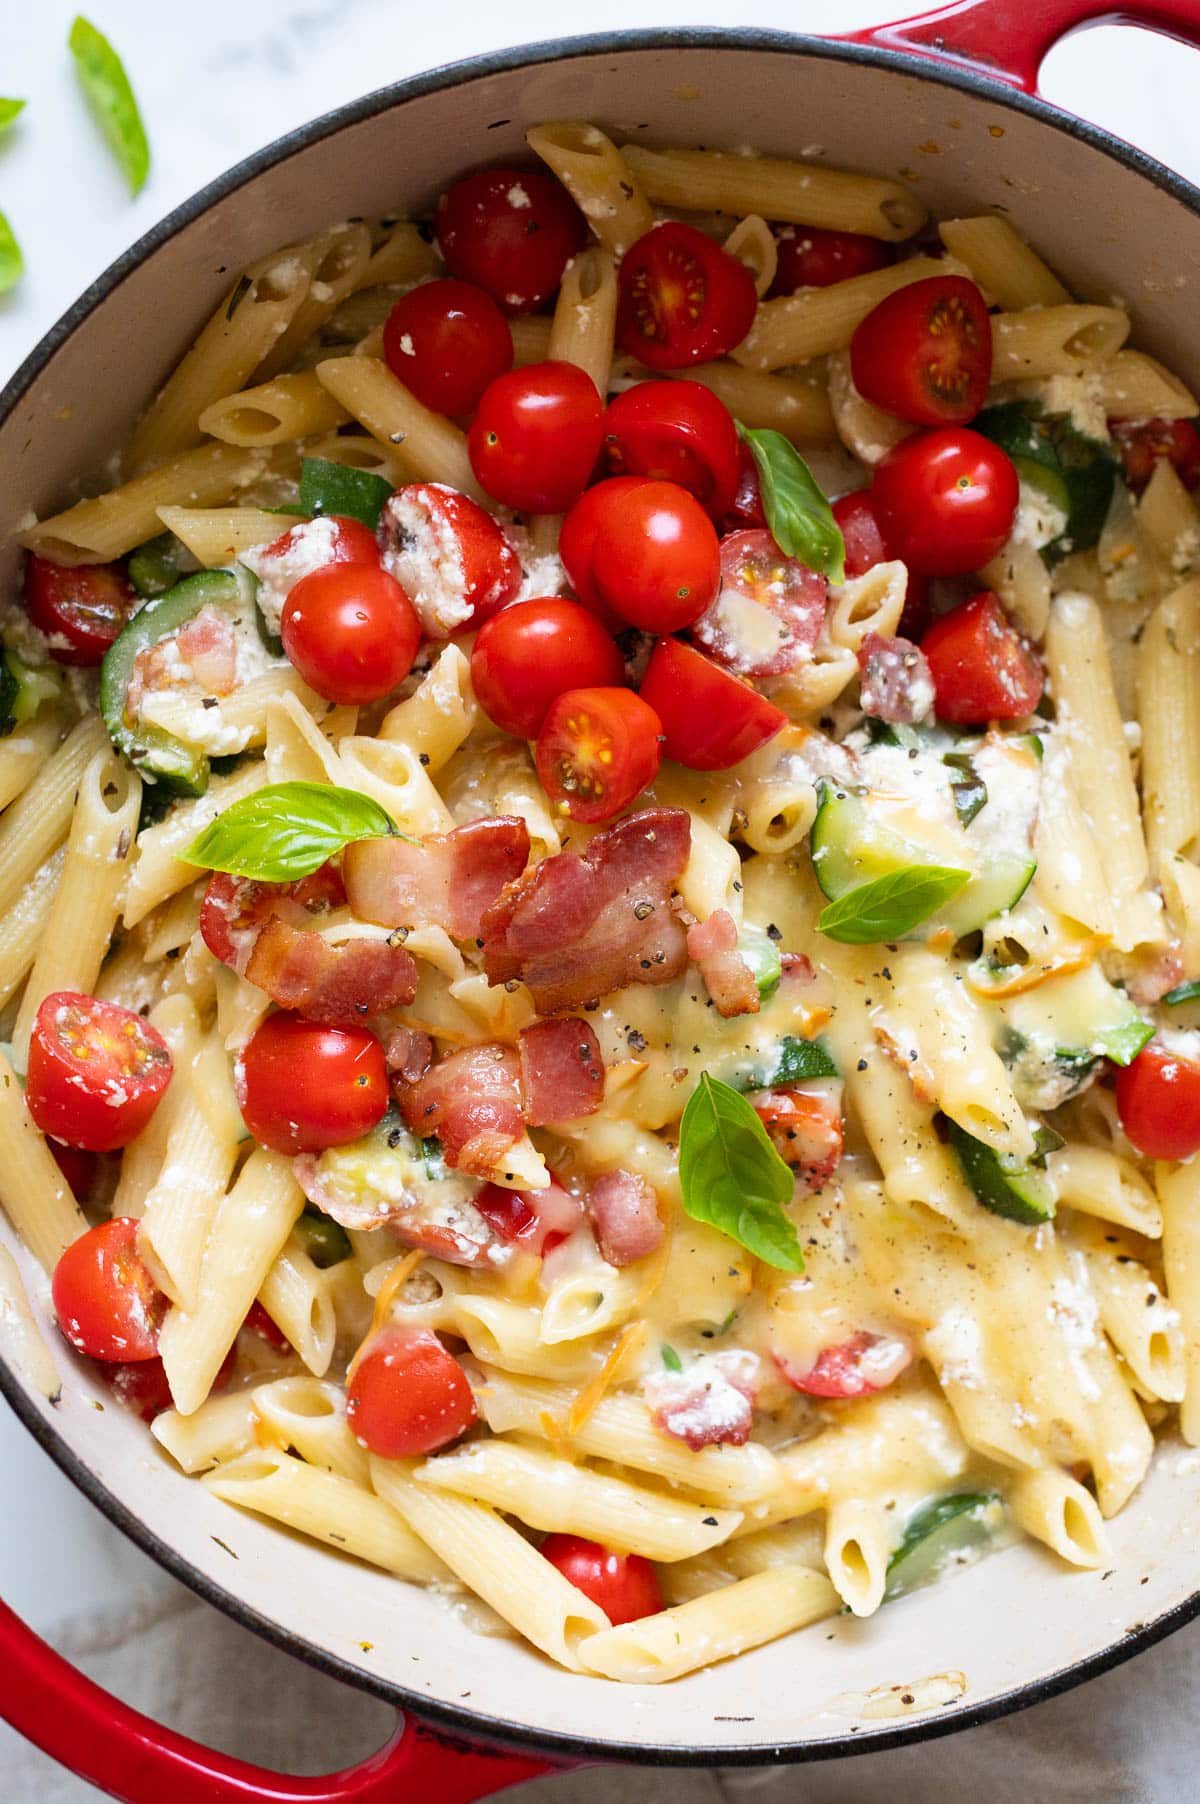 Zucchini ricotta pasta with tomatoes, bacon and cheese in a red pot.